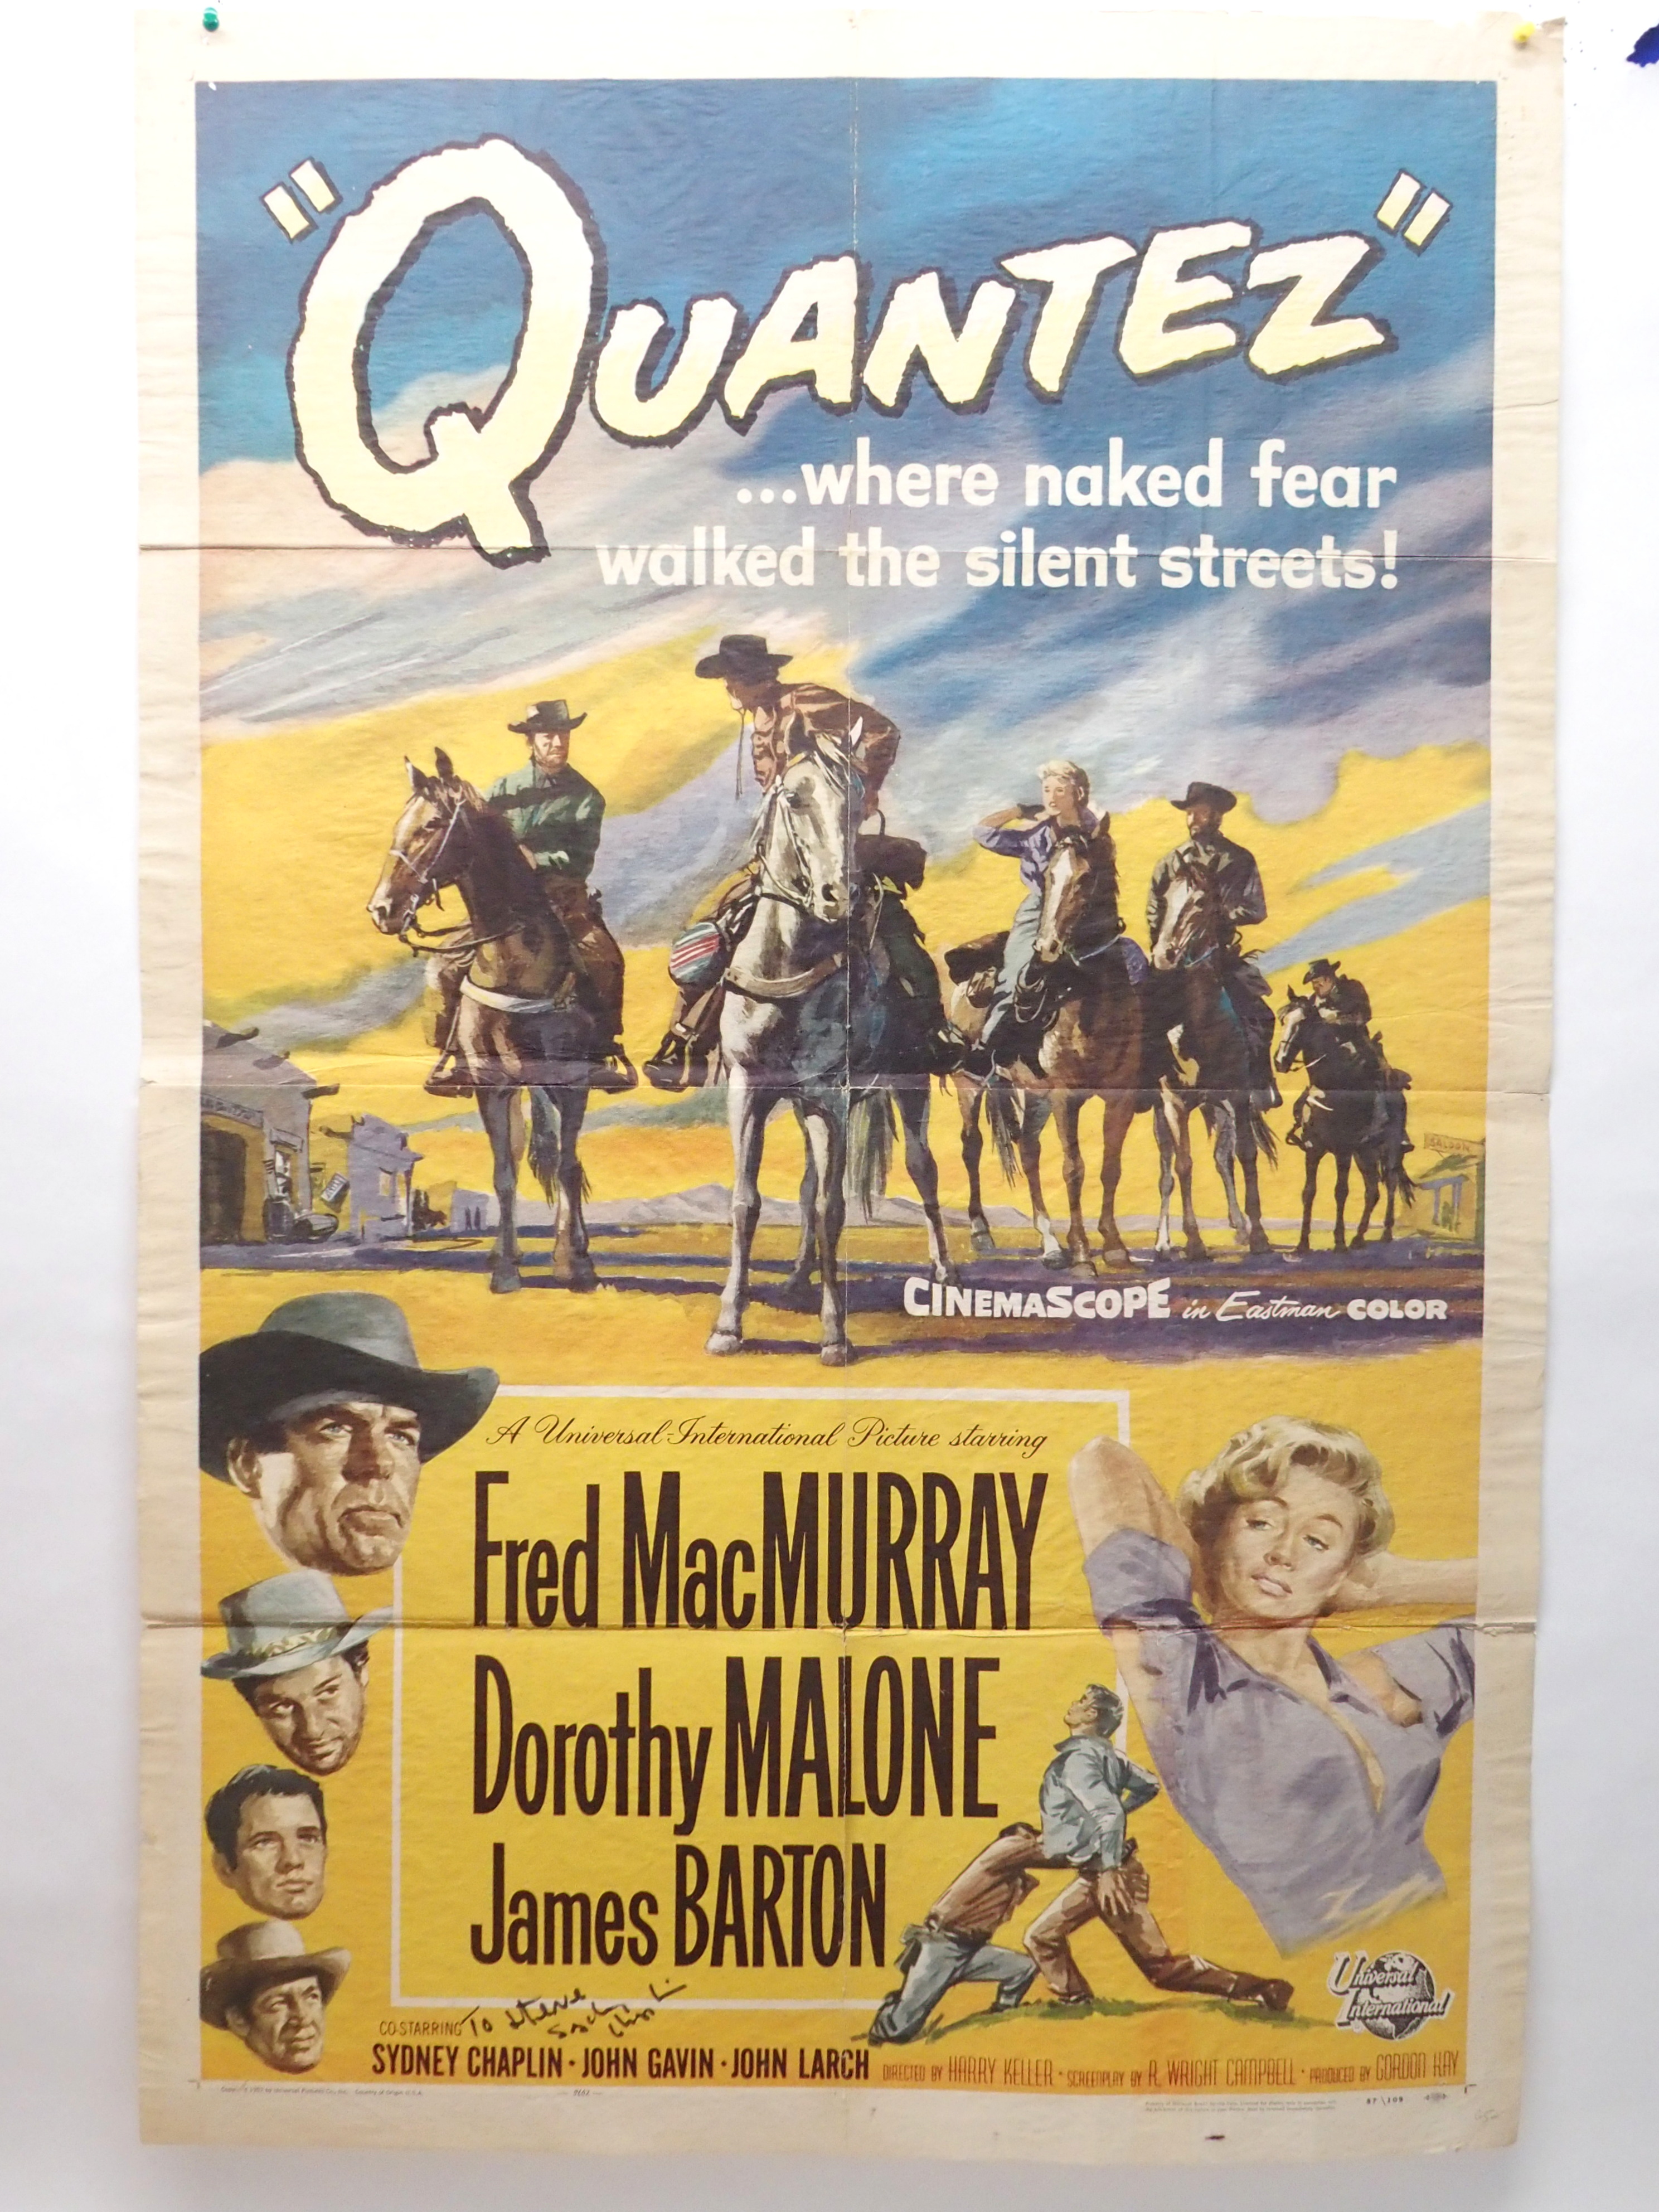 "QUANTEZ" movie poster, 1957, dedicated and autographed by Sydney Chaplin, horizontal and vertical